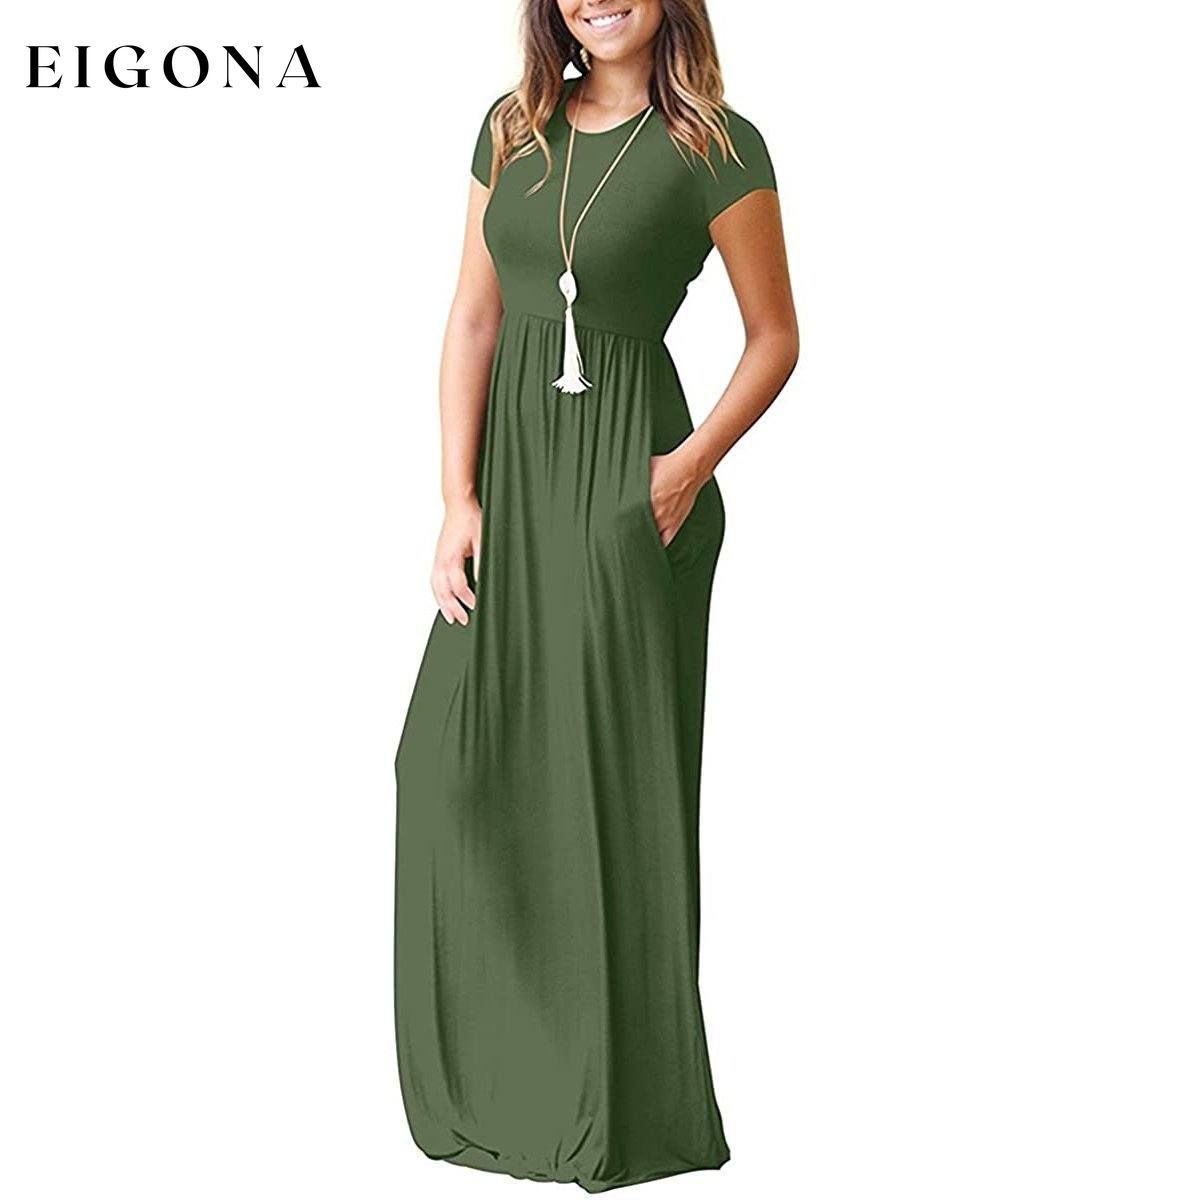 Women's Short Sleeve Loose Casual Long Dresses with Pockets __stock:200 casual dresses clothes dresses refund_fee:1200 show-color-swatches